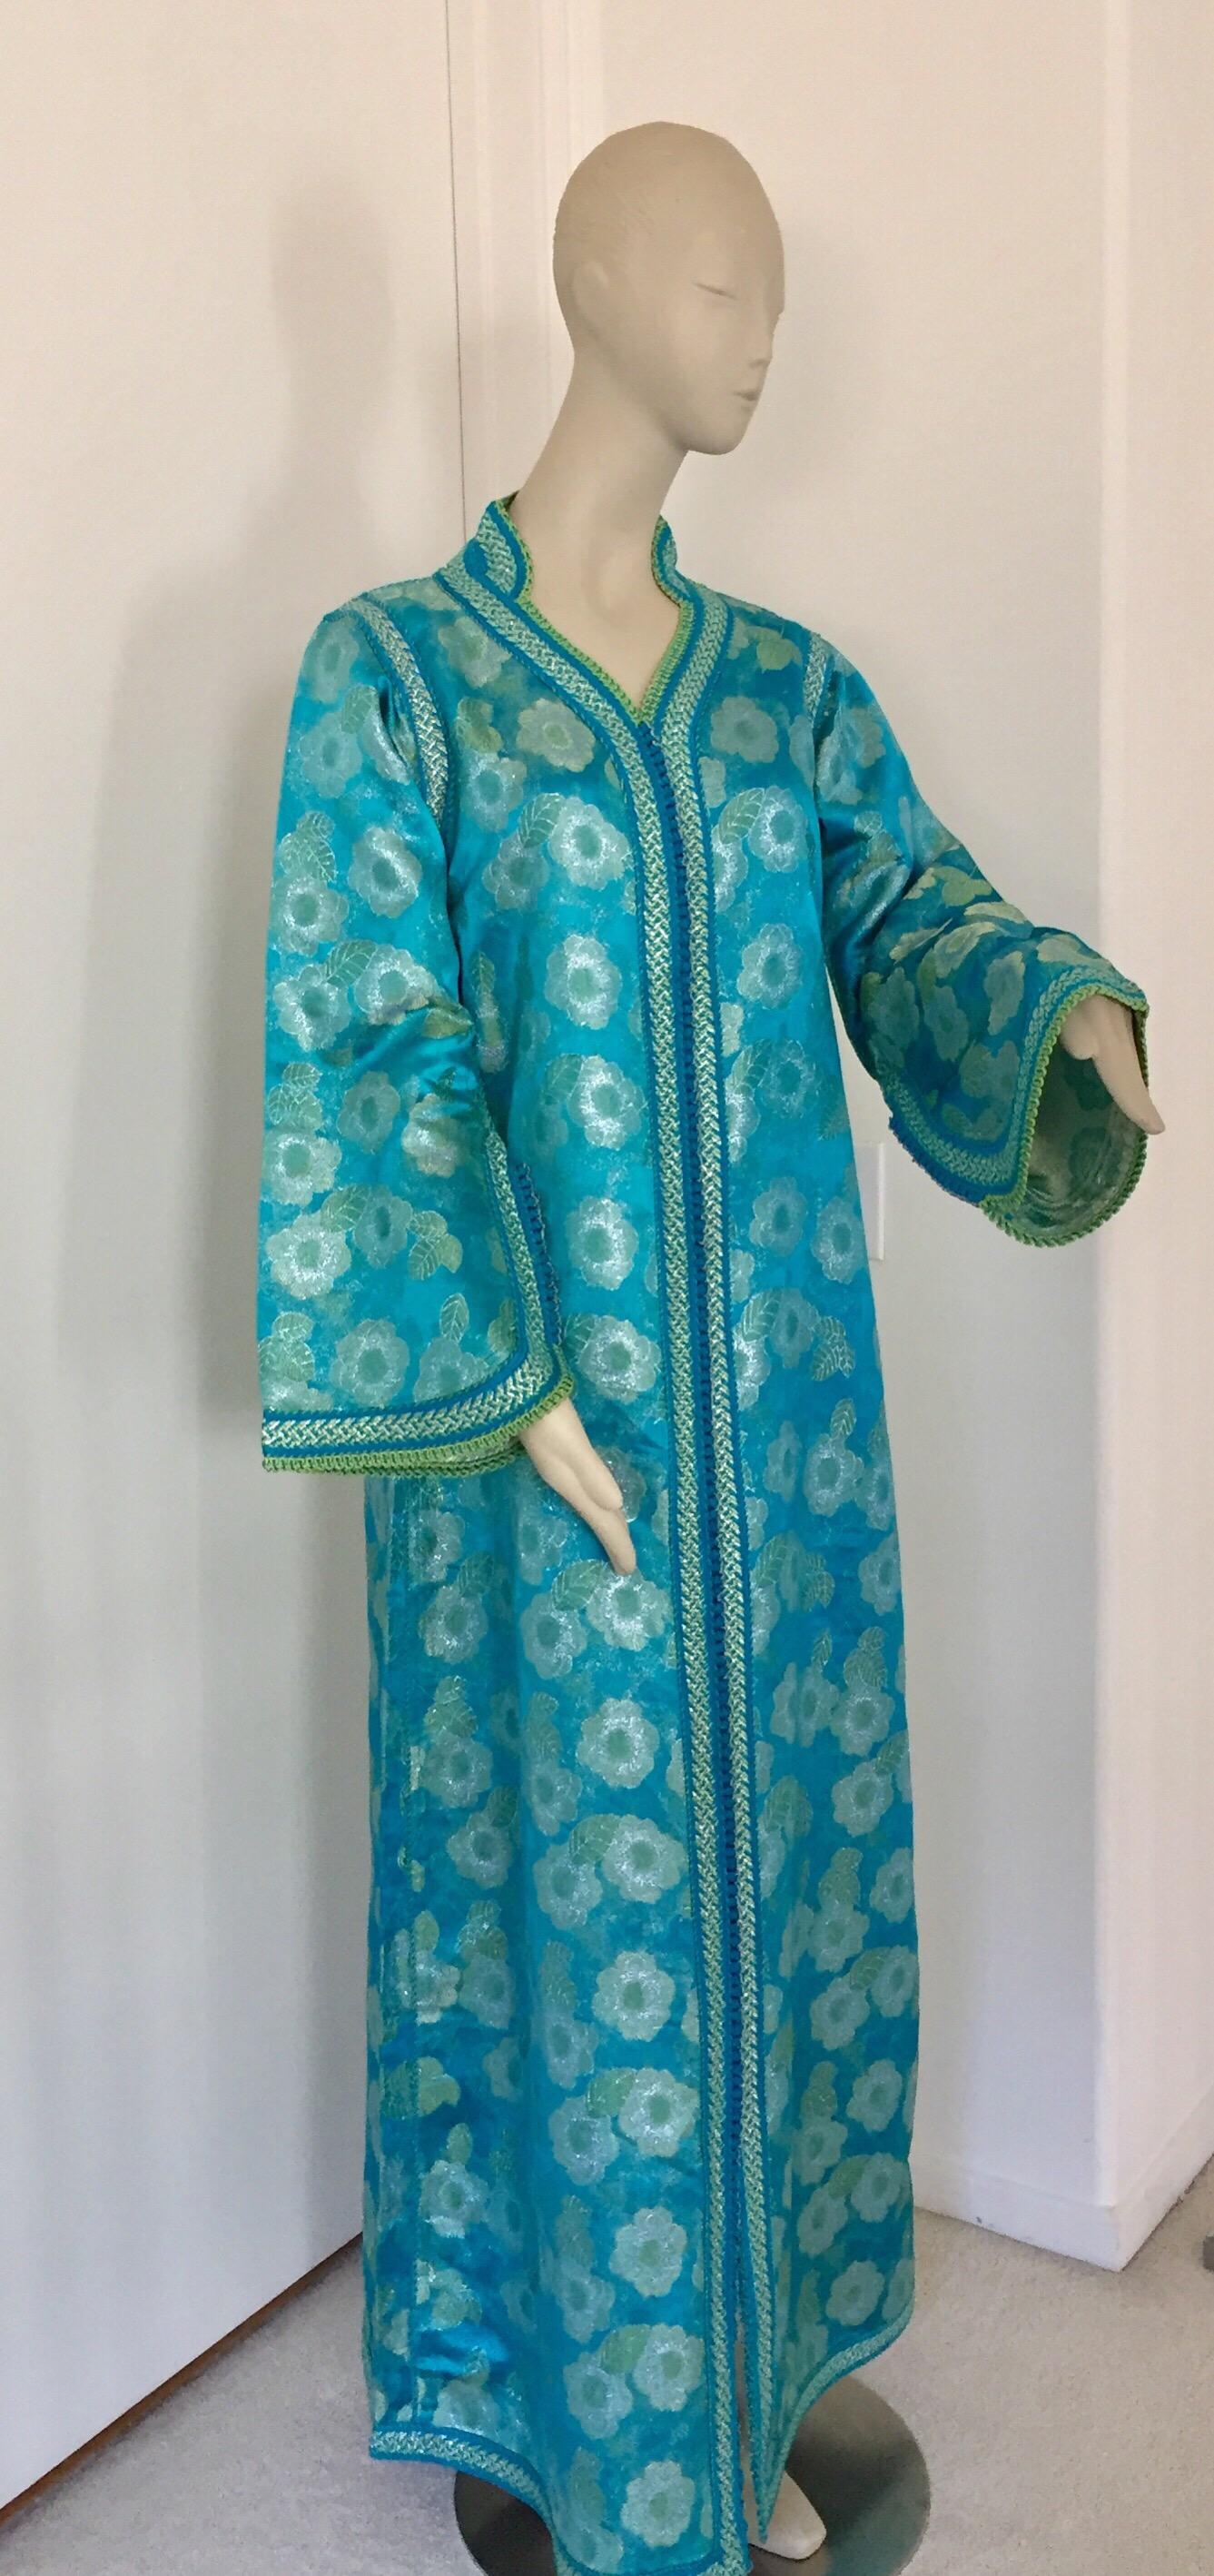 20th Century Vintage Moroccan Kaftan in Turquoise and Gold Floral Brocade For Sale